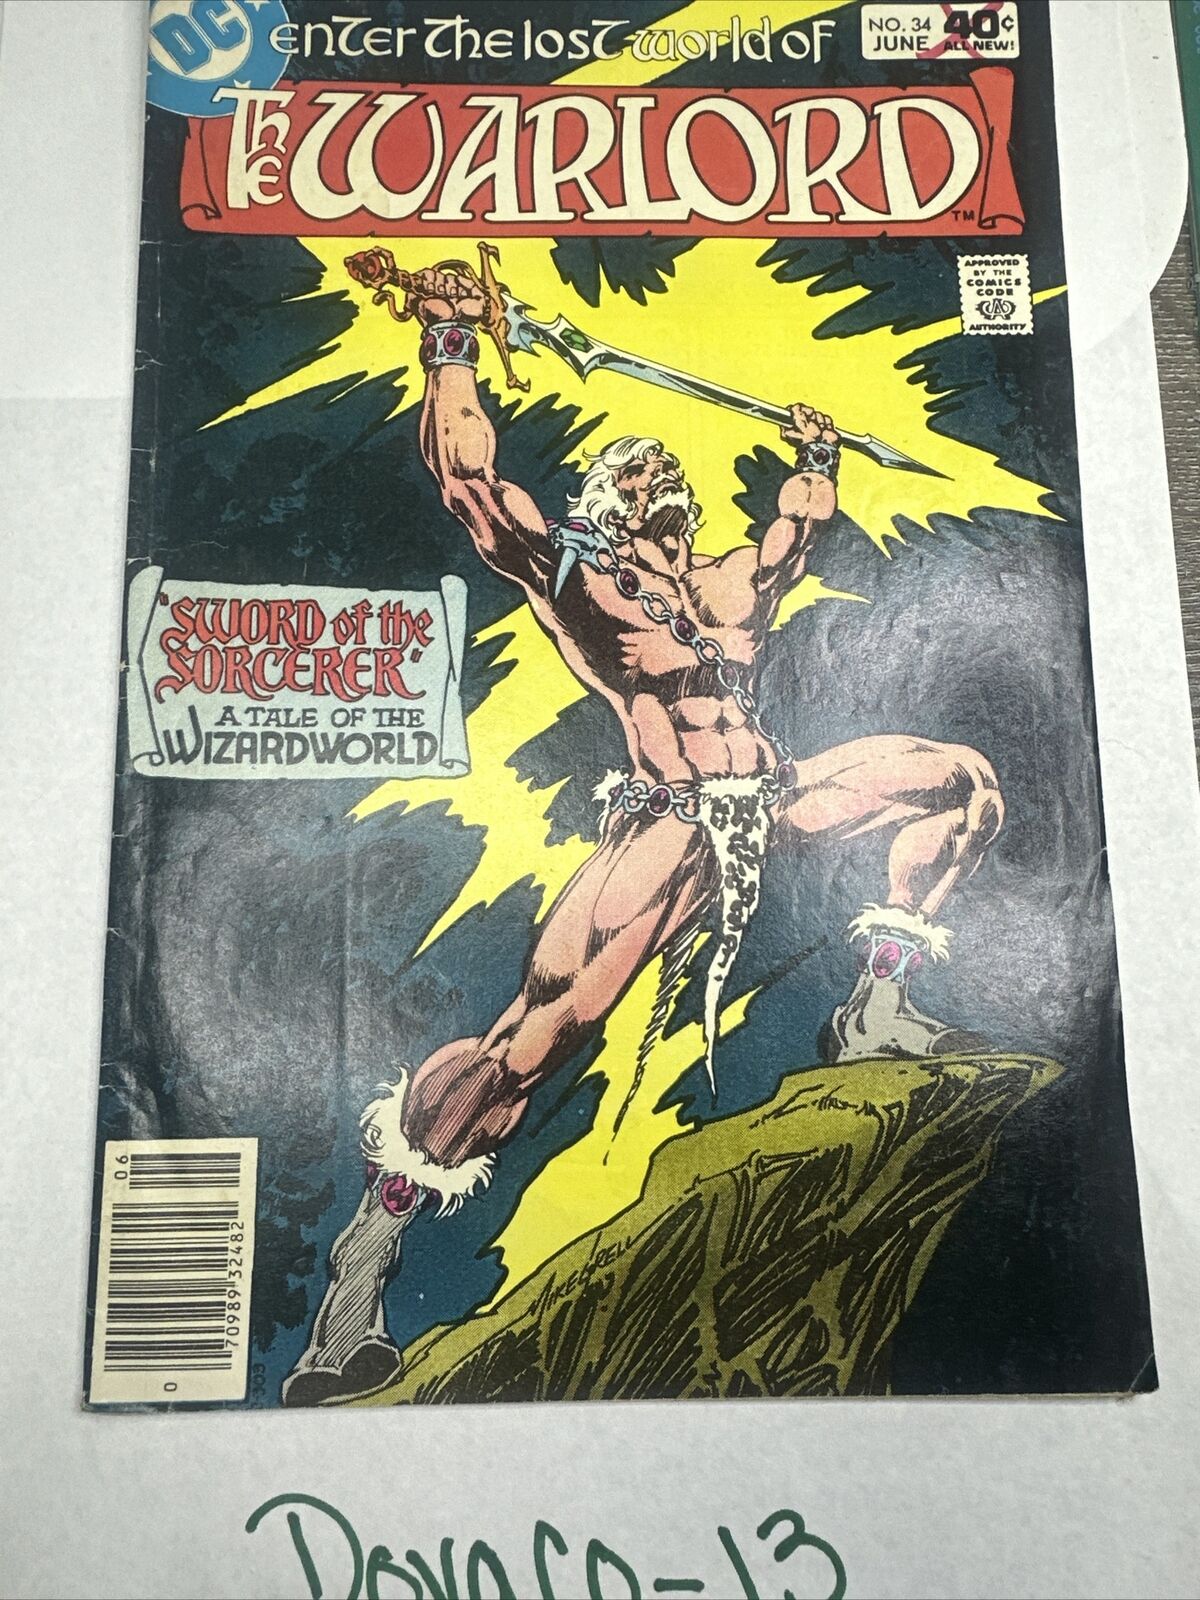 The Warlord Volume 5 No. 34 Sword of the Sorcerer (1980)